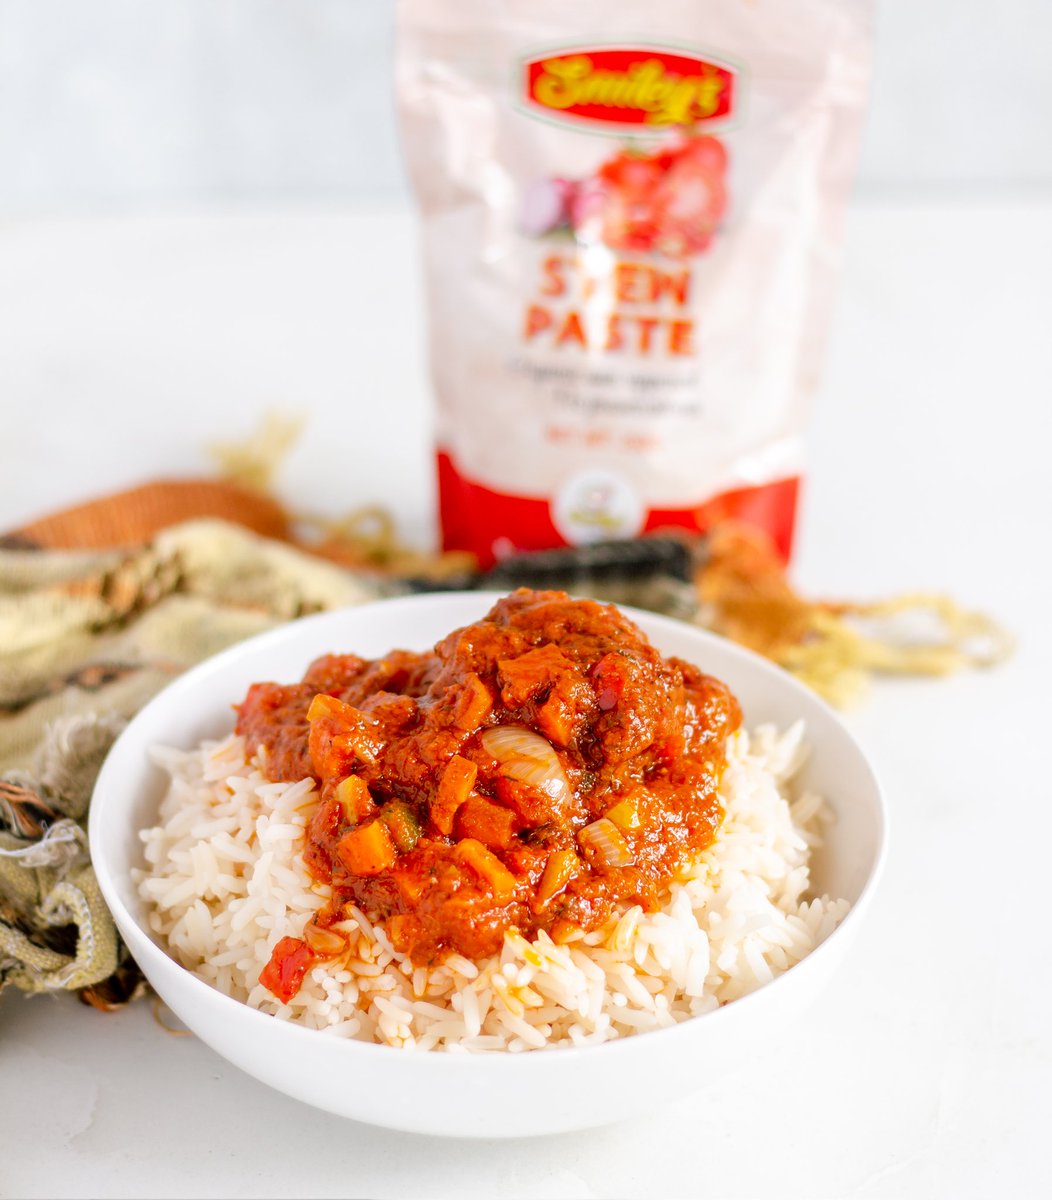 Feeling overwhelmed with meal prep? Let Smiley'z Foods save the day with our convenient tomato pastes and sauces! 

#MealPrepSolutions #EasyCooking #smileyzfood #smileyzmobilekitchen